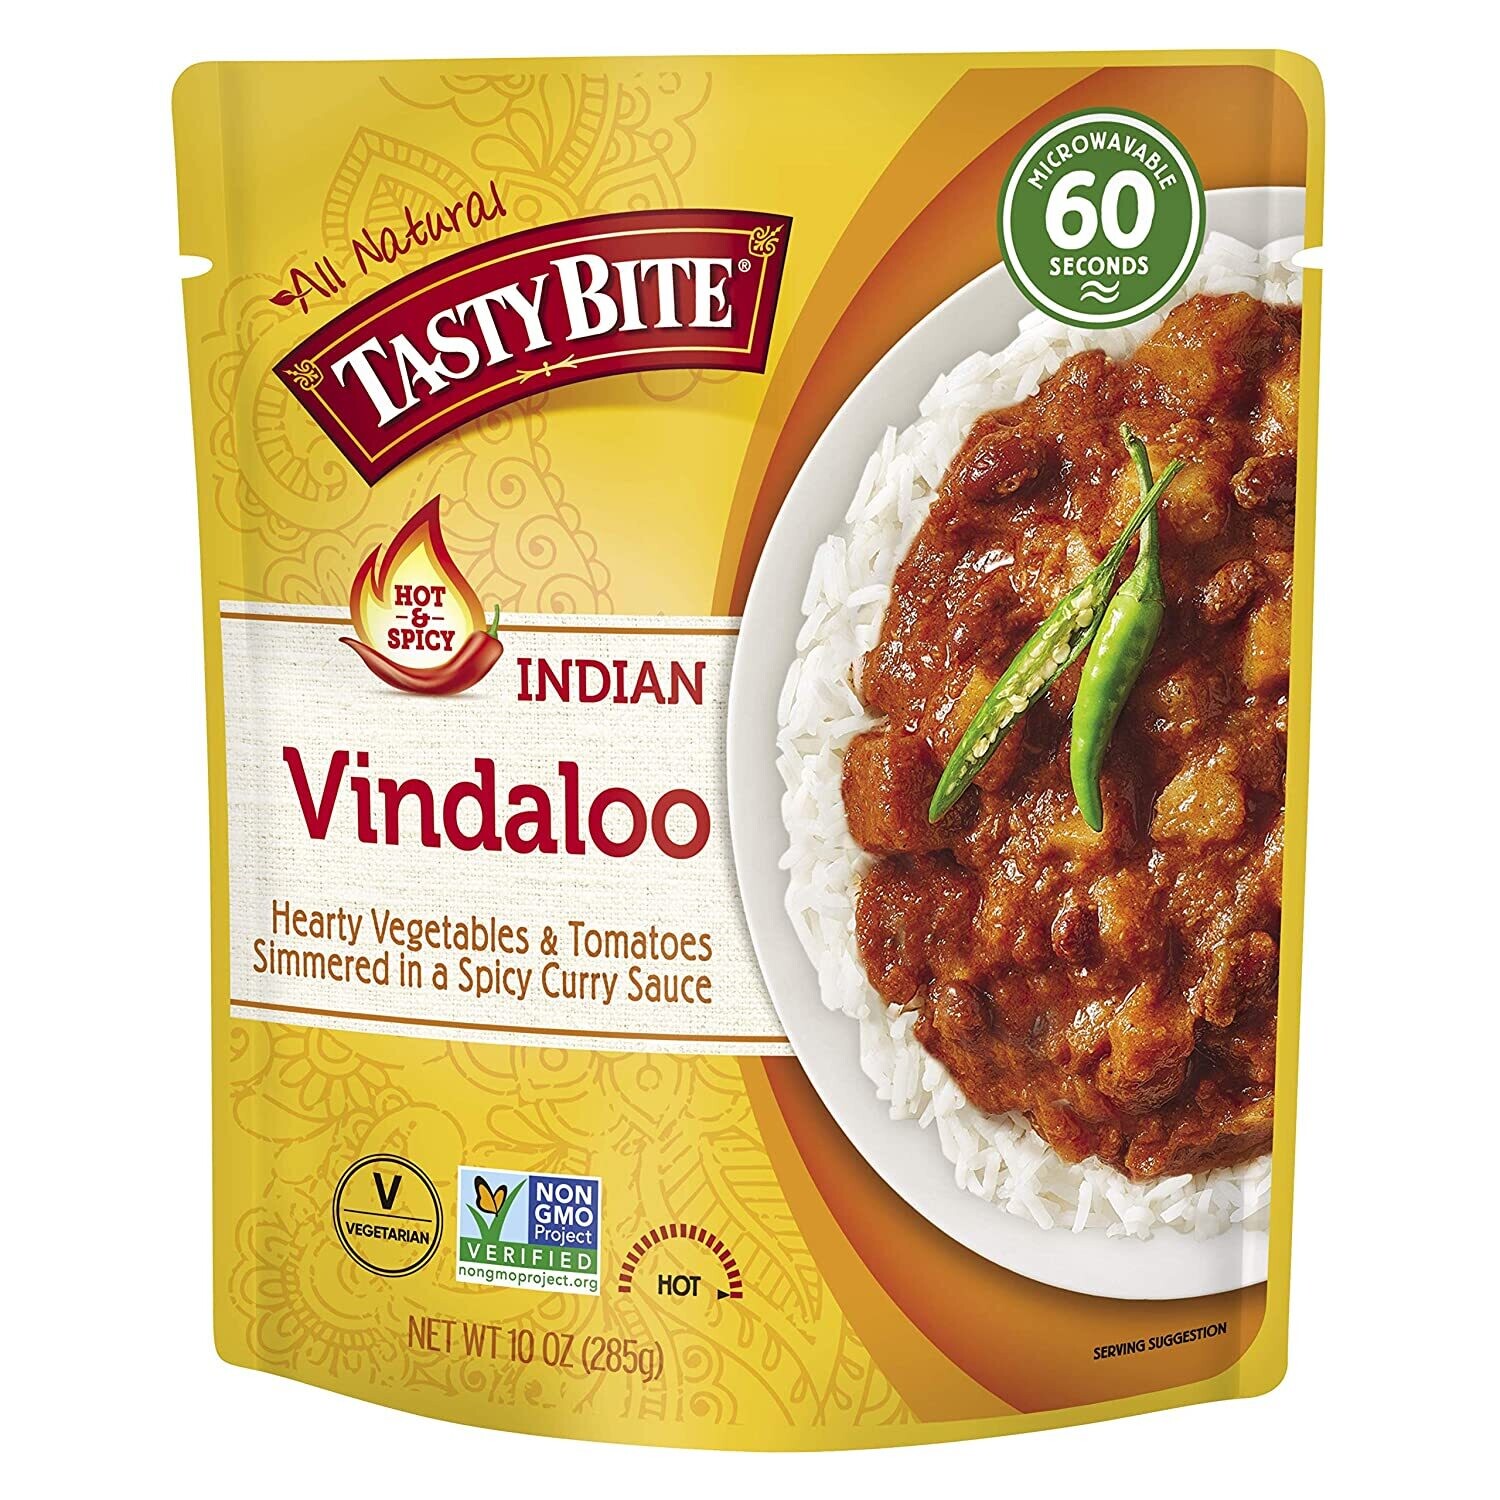 Tasty Bite Indian Microwave Pouches Vindaloo